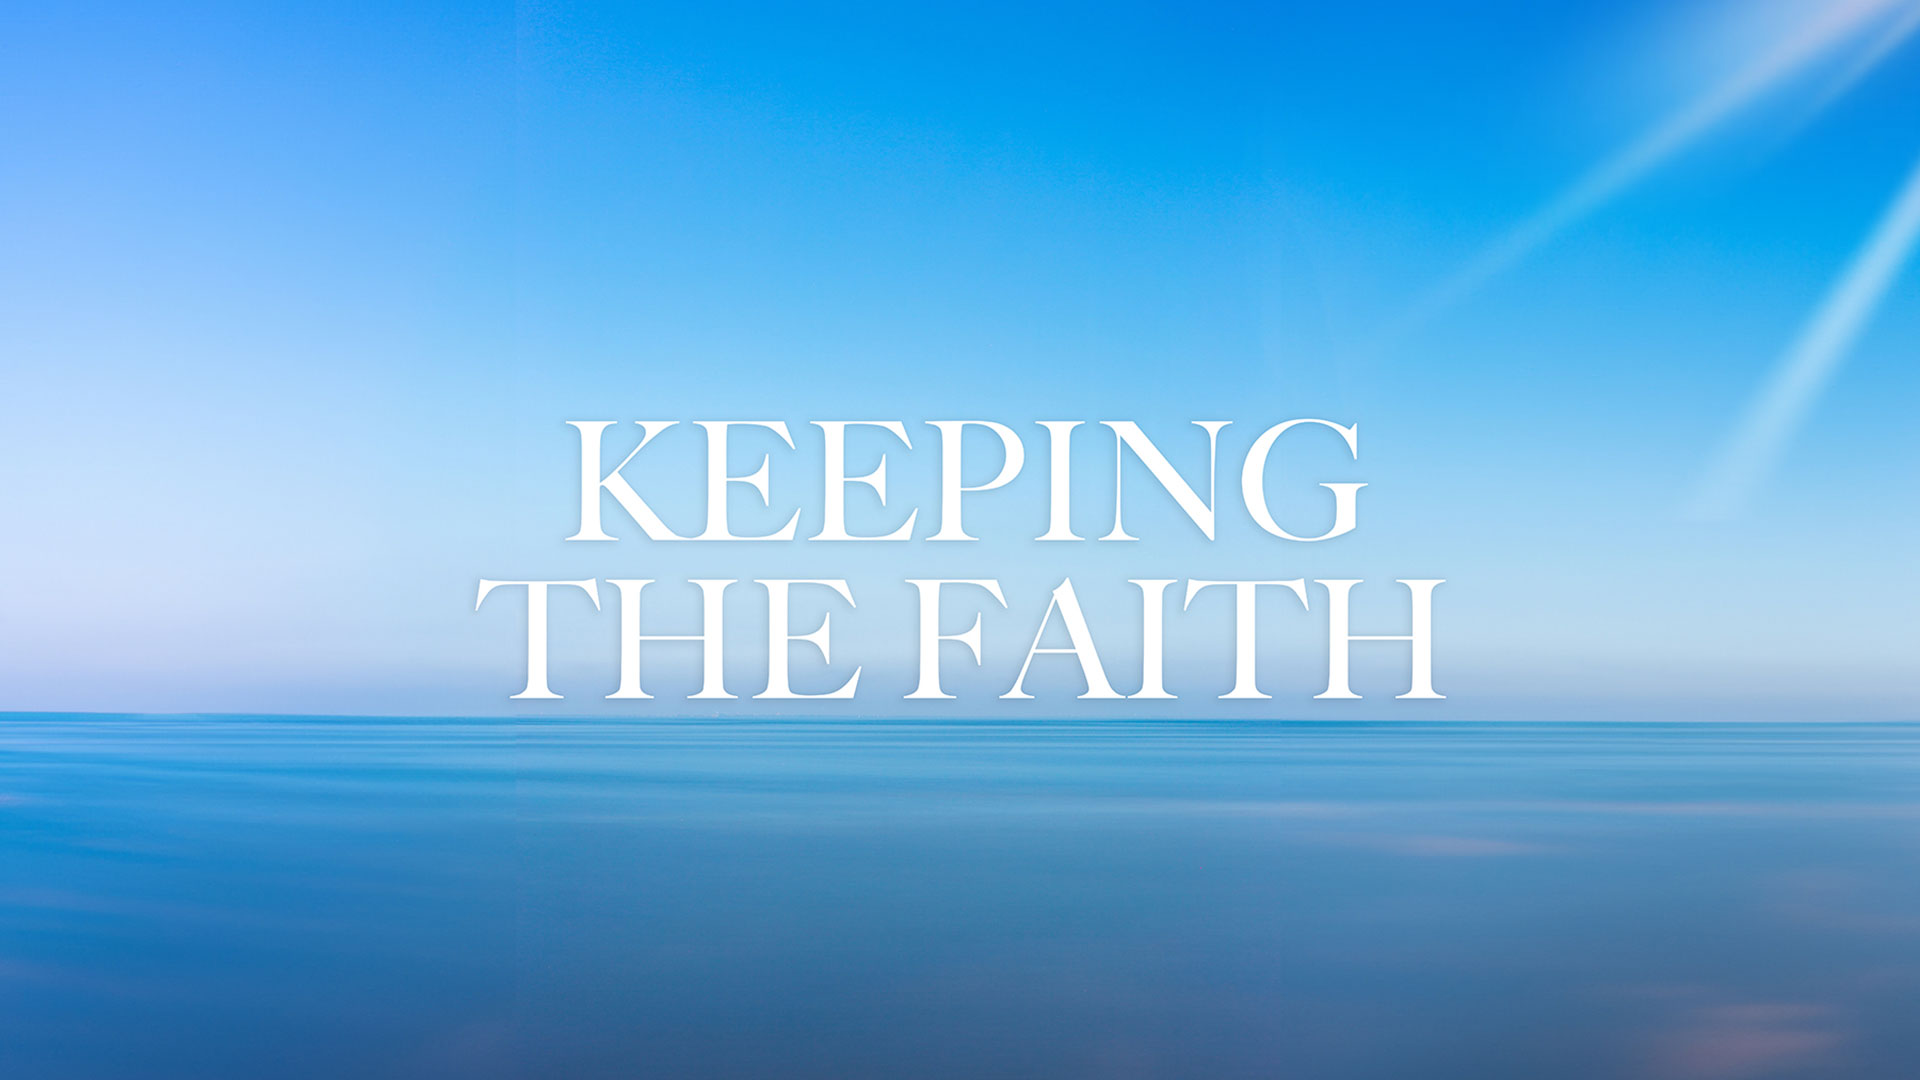 Series: Keeping The Faith, 2nd Timothy 4:1-7